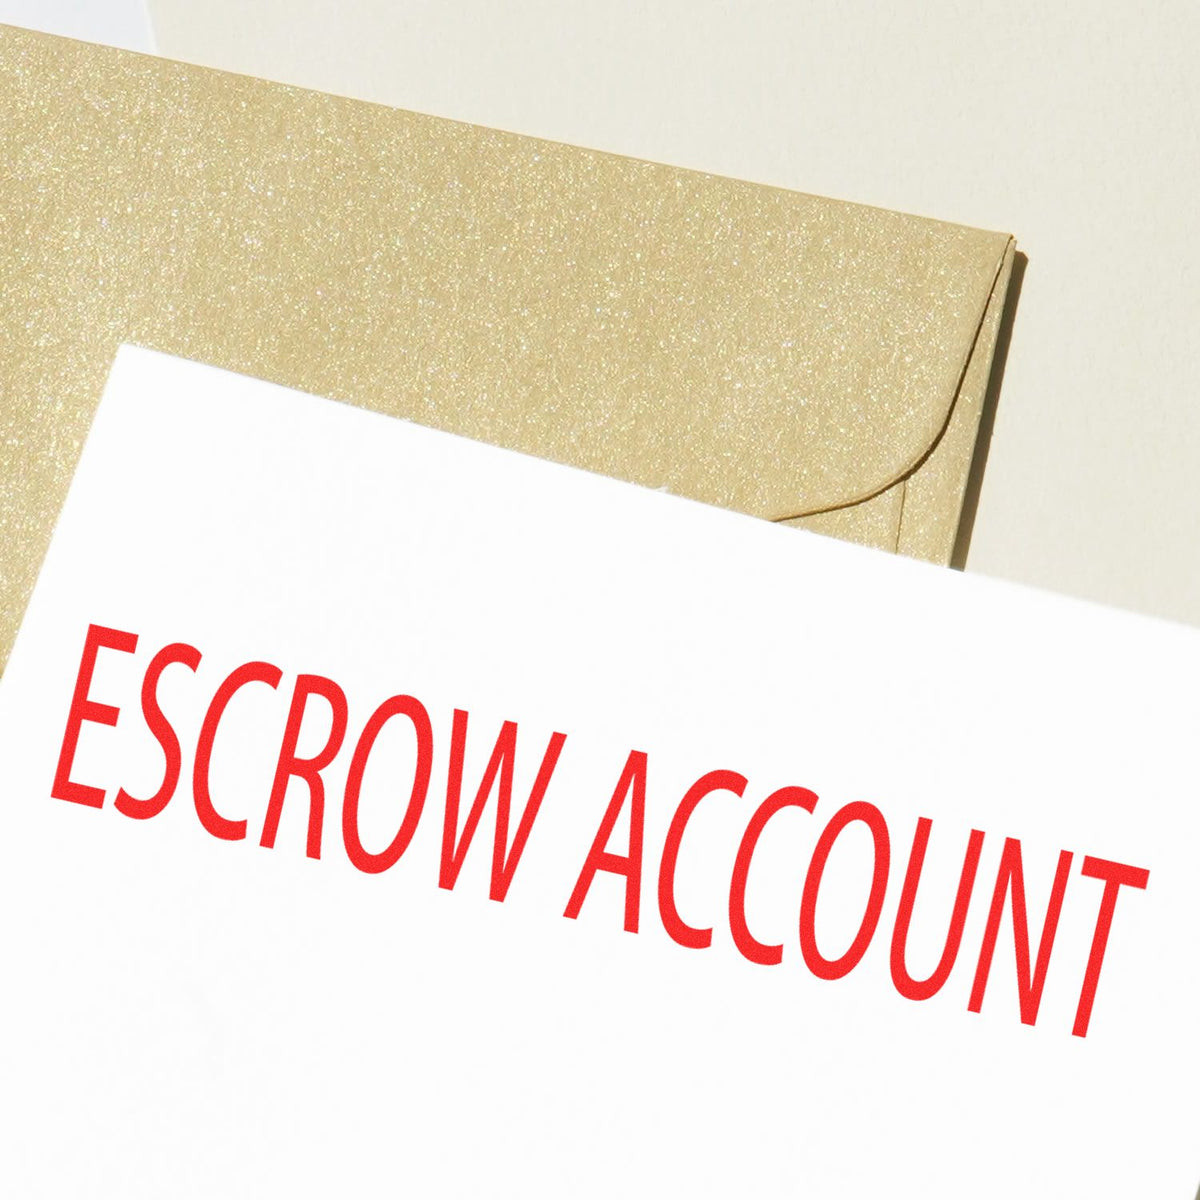 Slim Pre-Inked Escrow Account Stamp In Use Photo